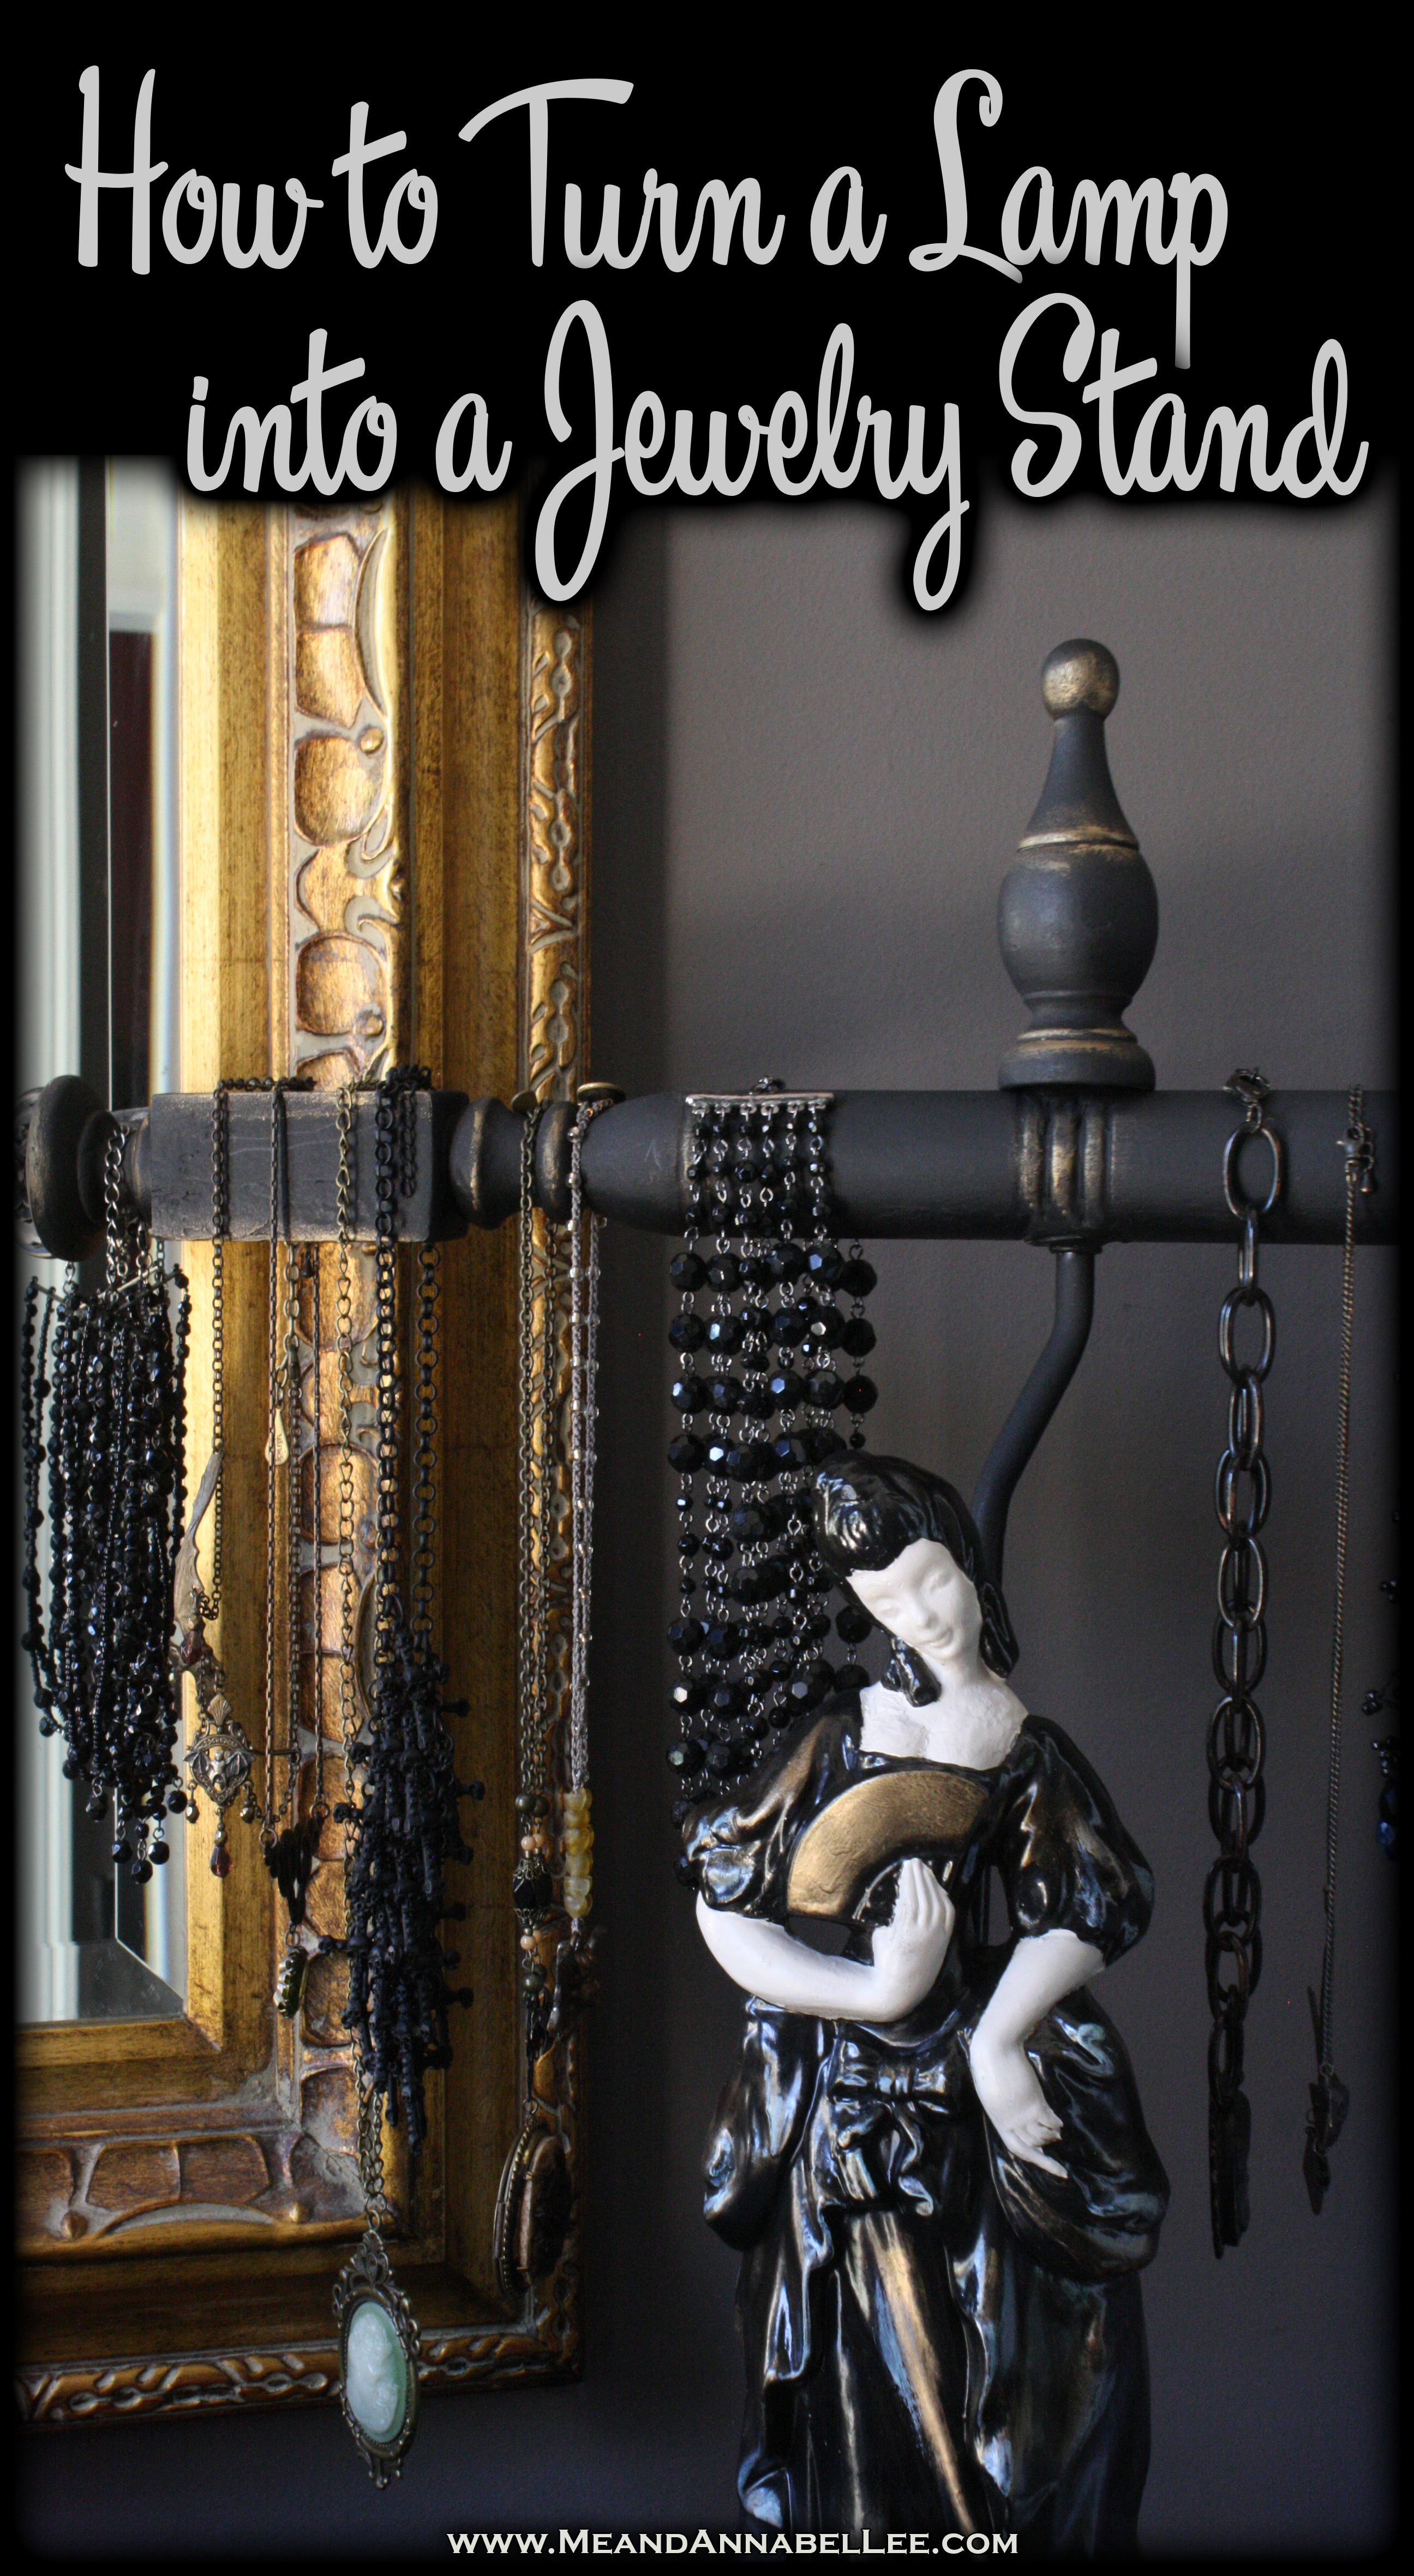 DIY Victorian Gothic Jewelry Stand | How to transform a lamp into a necklace display | Rub n Buff Antique Finish | Goth it Yourself | www.MeandAnnabelLee.com